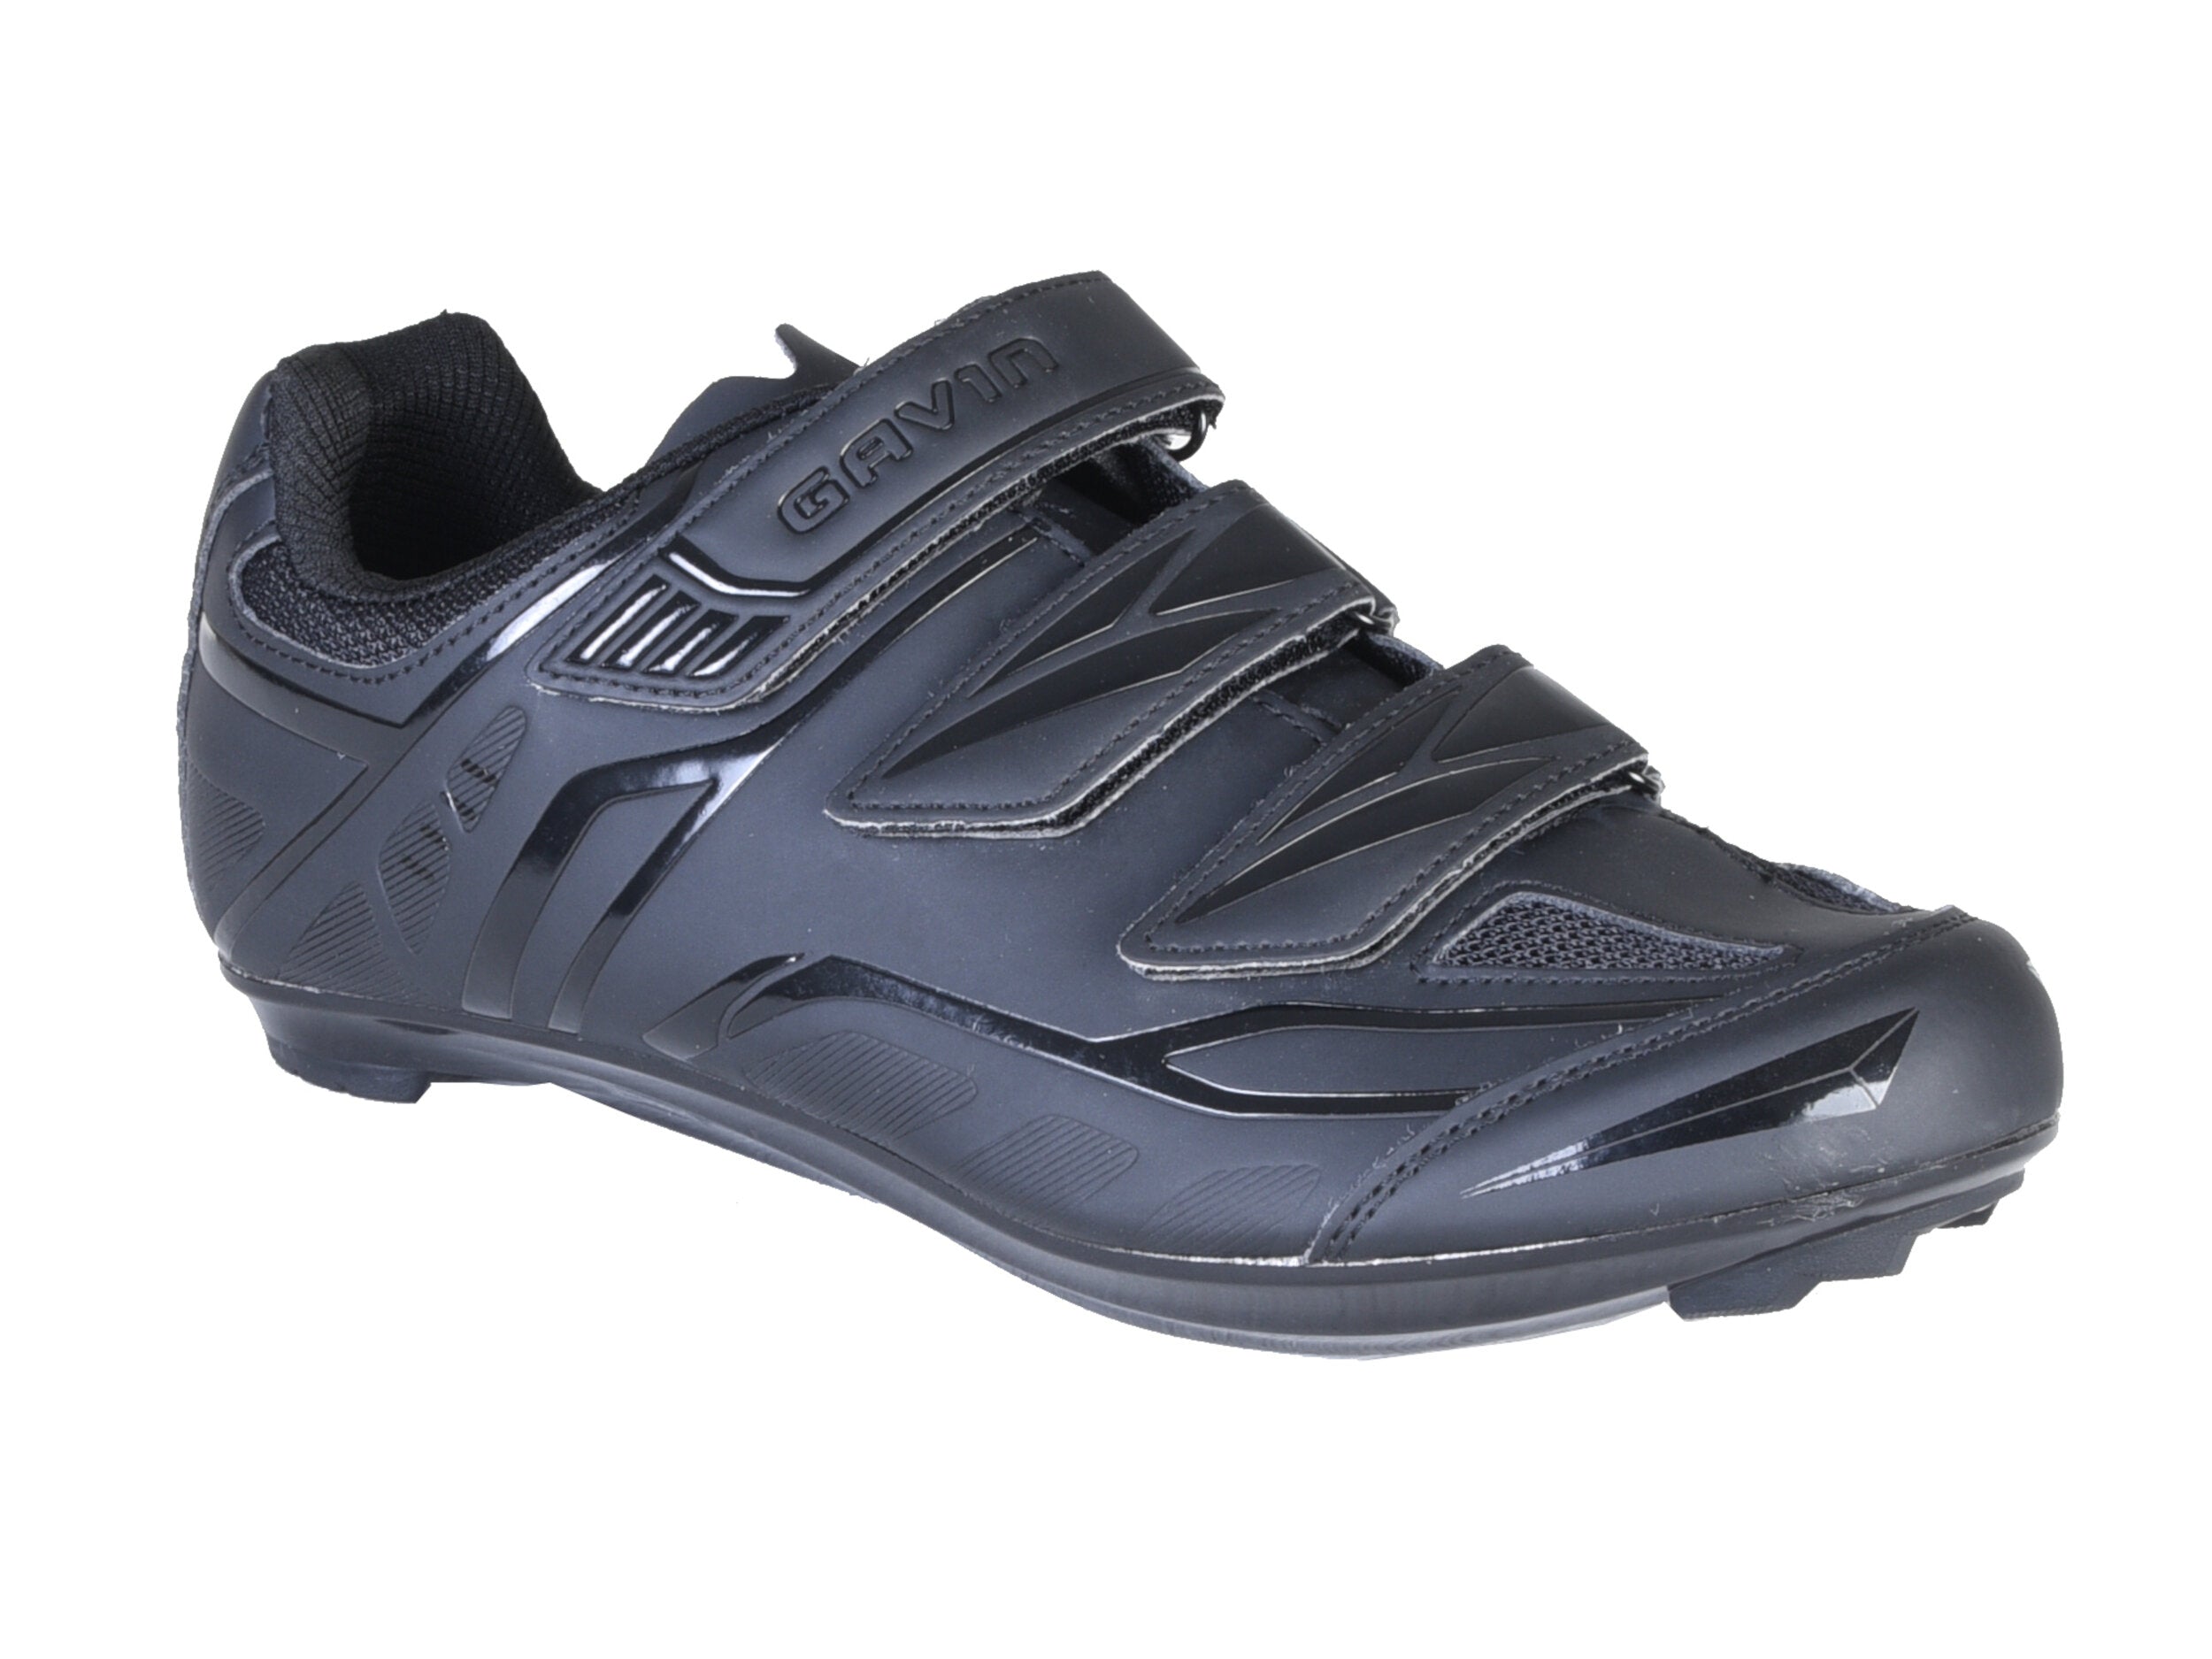 cycling shoes 3 bolt cleat